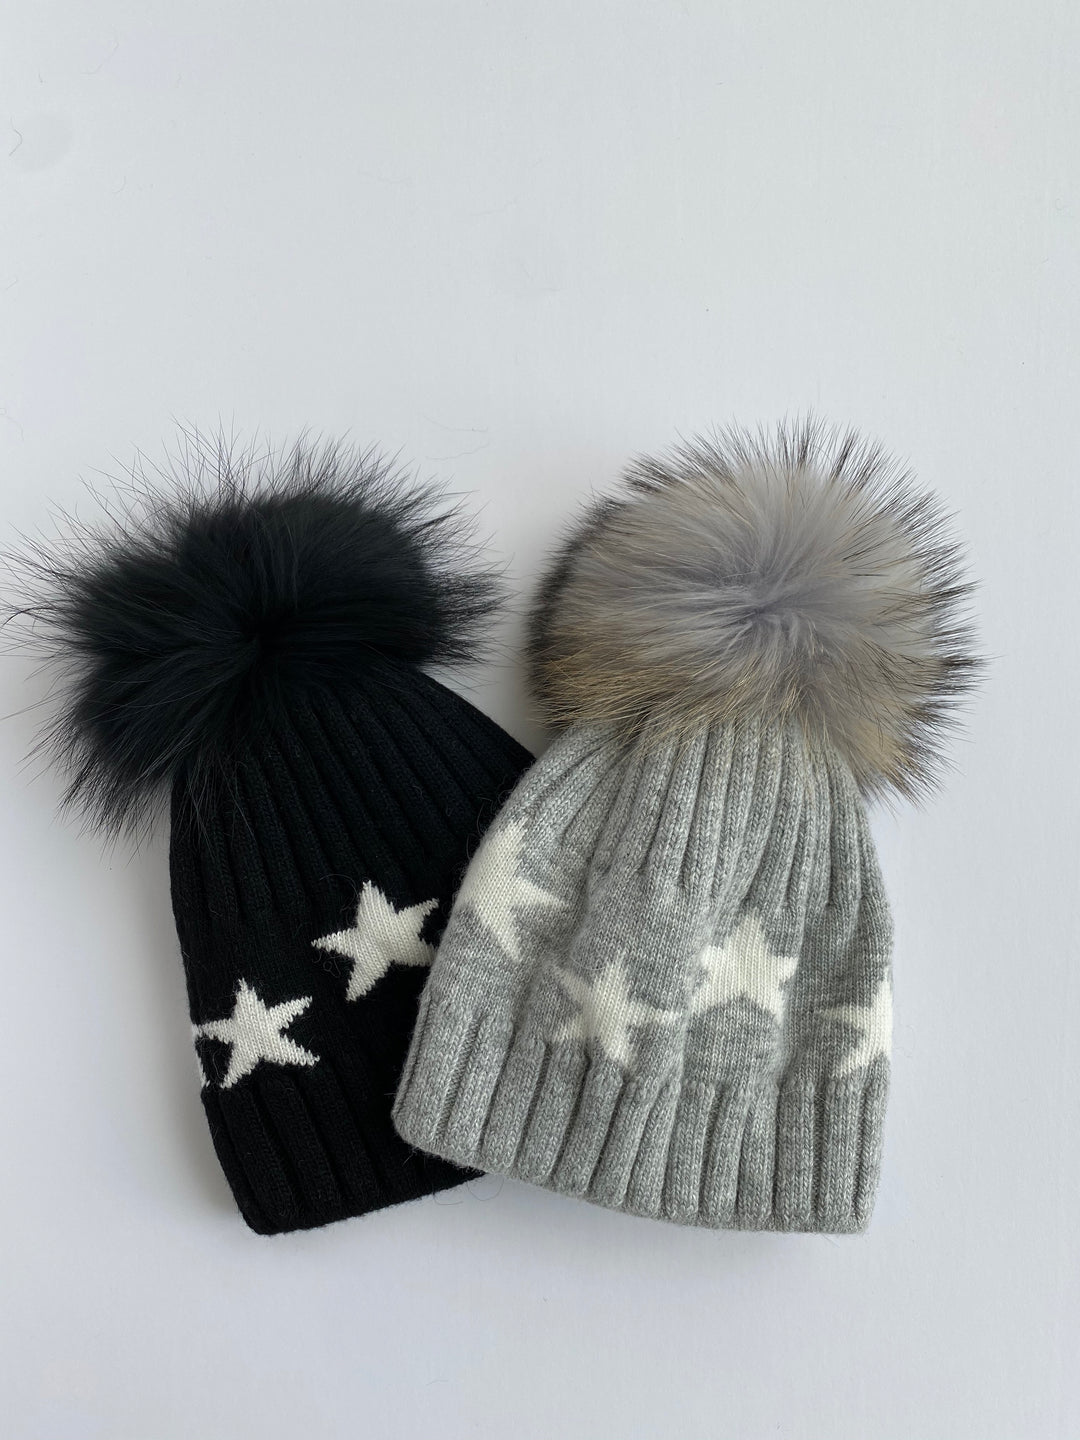 Equation Starry Hat in Heather Gray with white stars